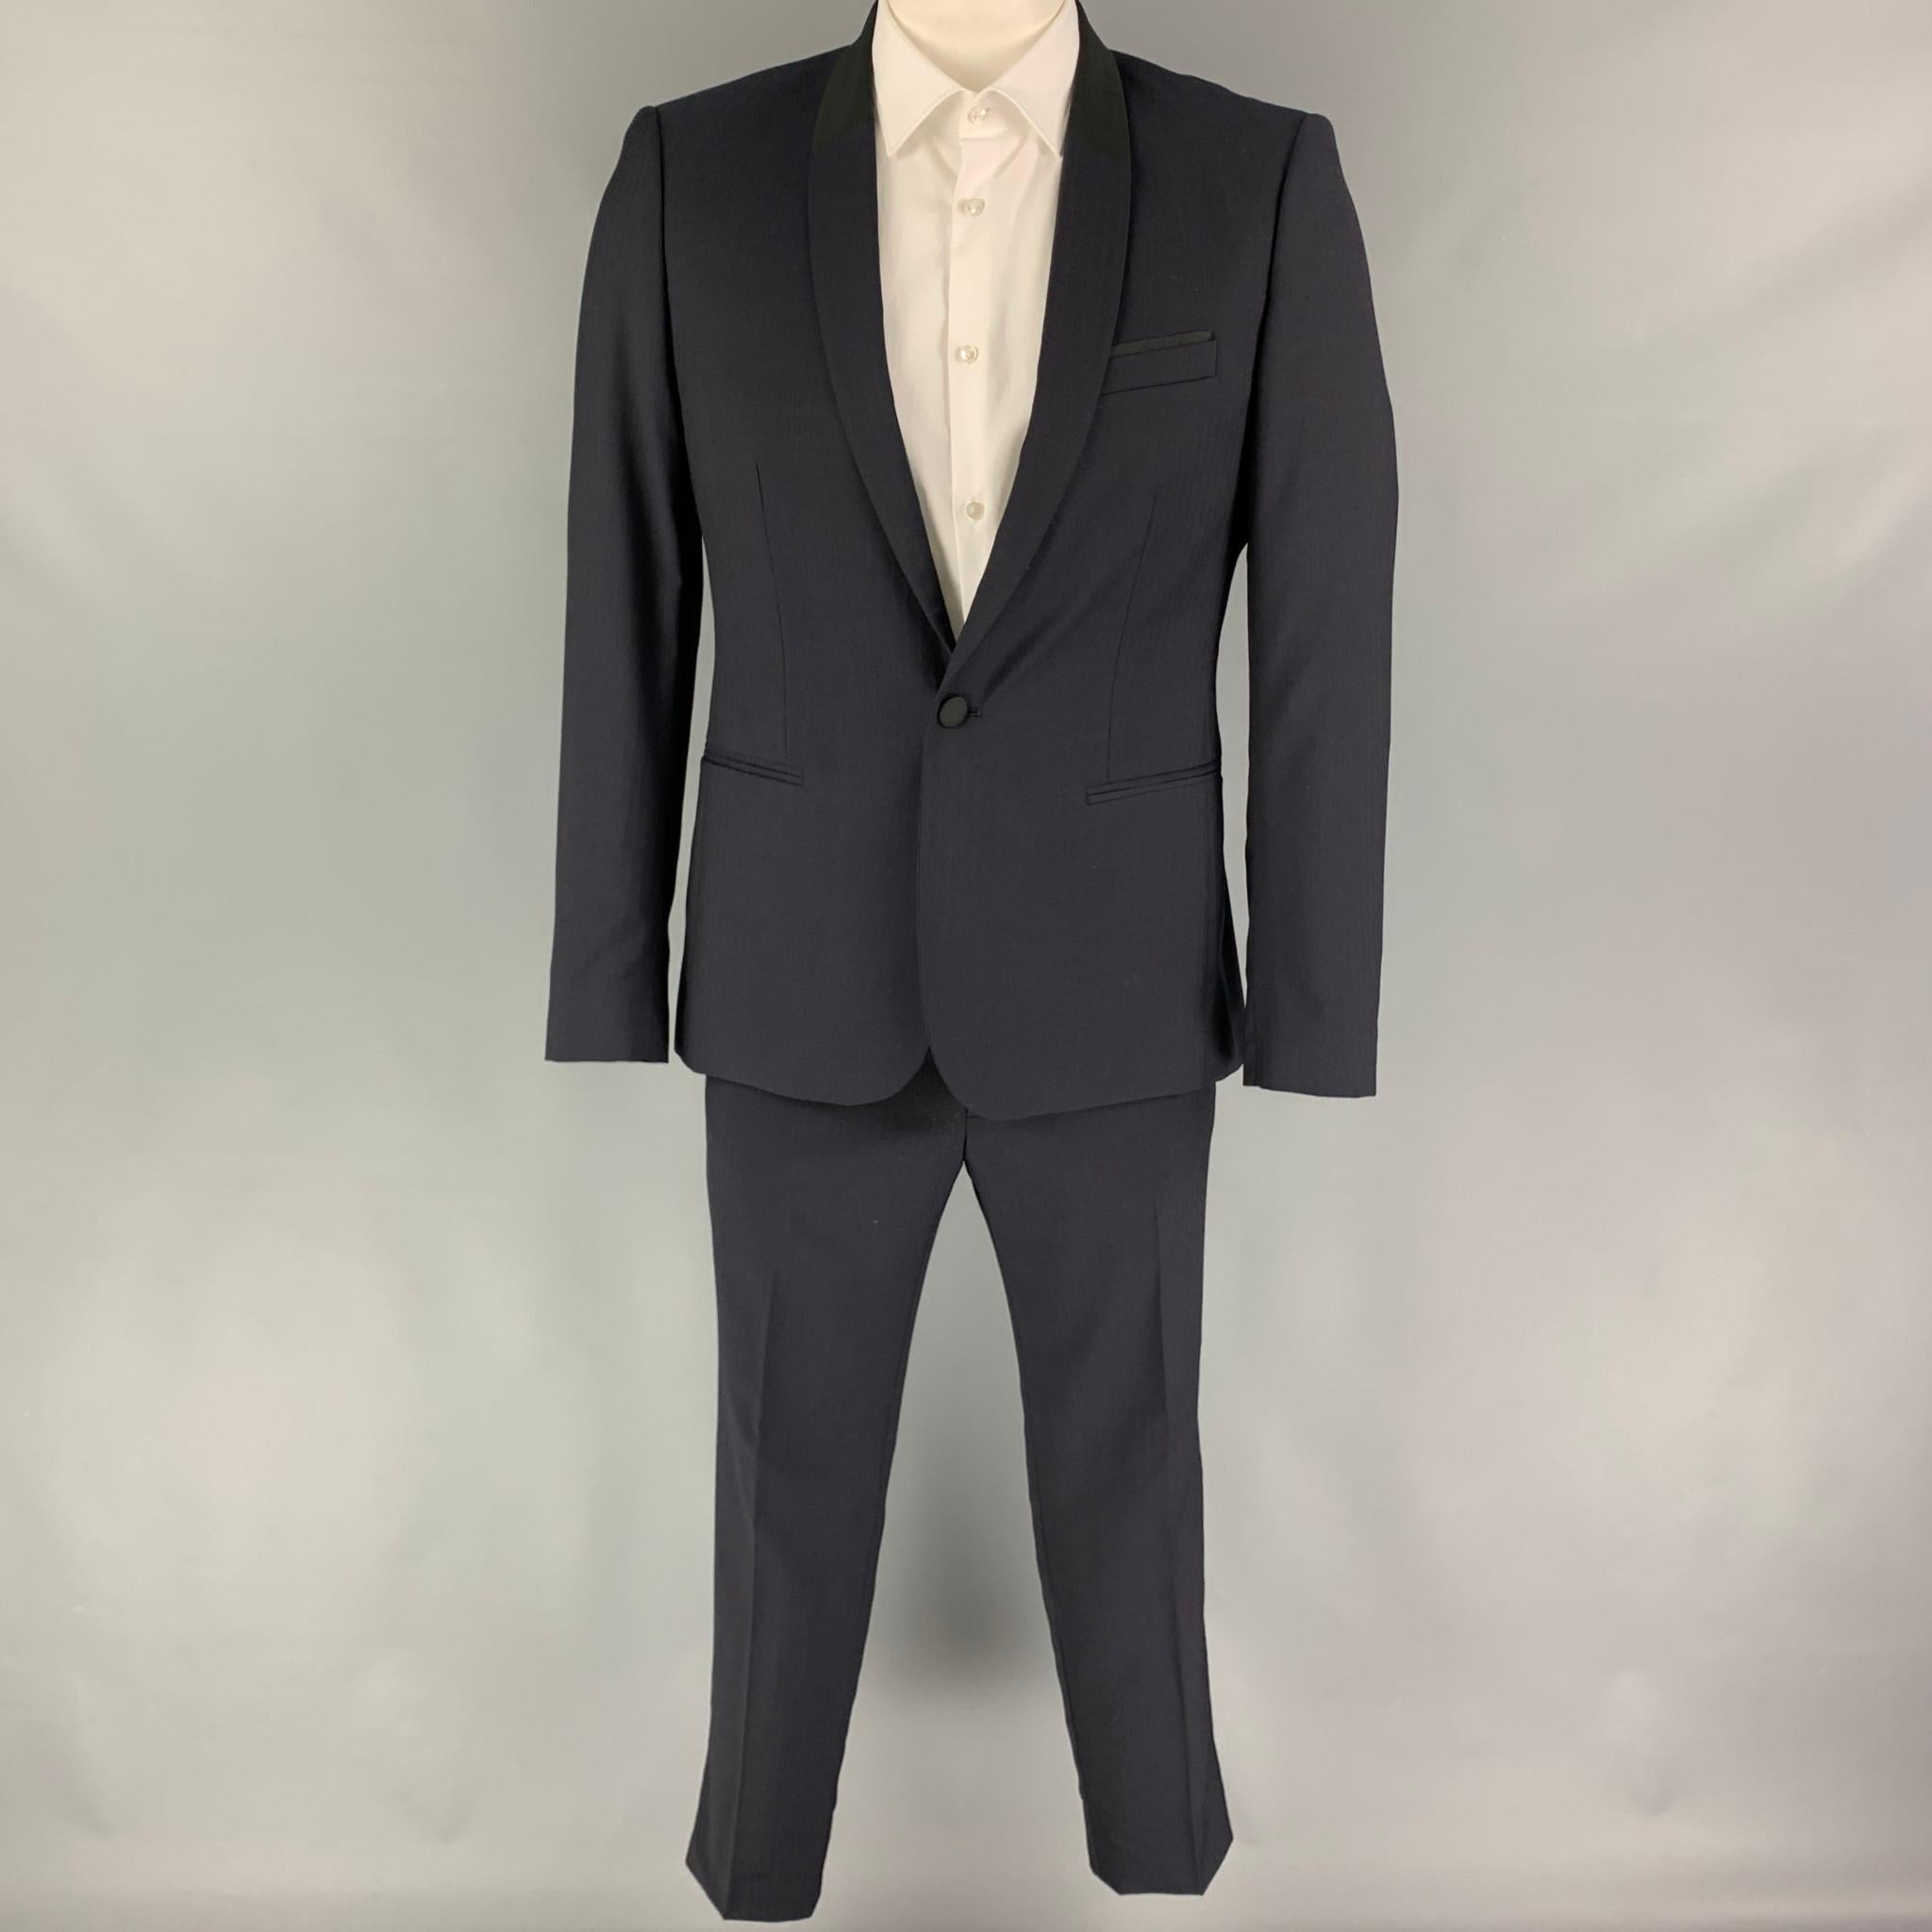 THE KOOPLES suit comes in a navy & black herringbone wool / mohair with a full liner includes a single breasted, single button sport coat with a shawl collar and matching flat front trousers.

Excellent Pre-Owned Condition.
Marked: